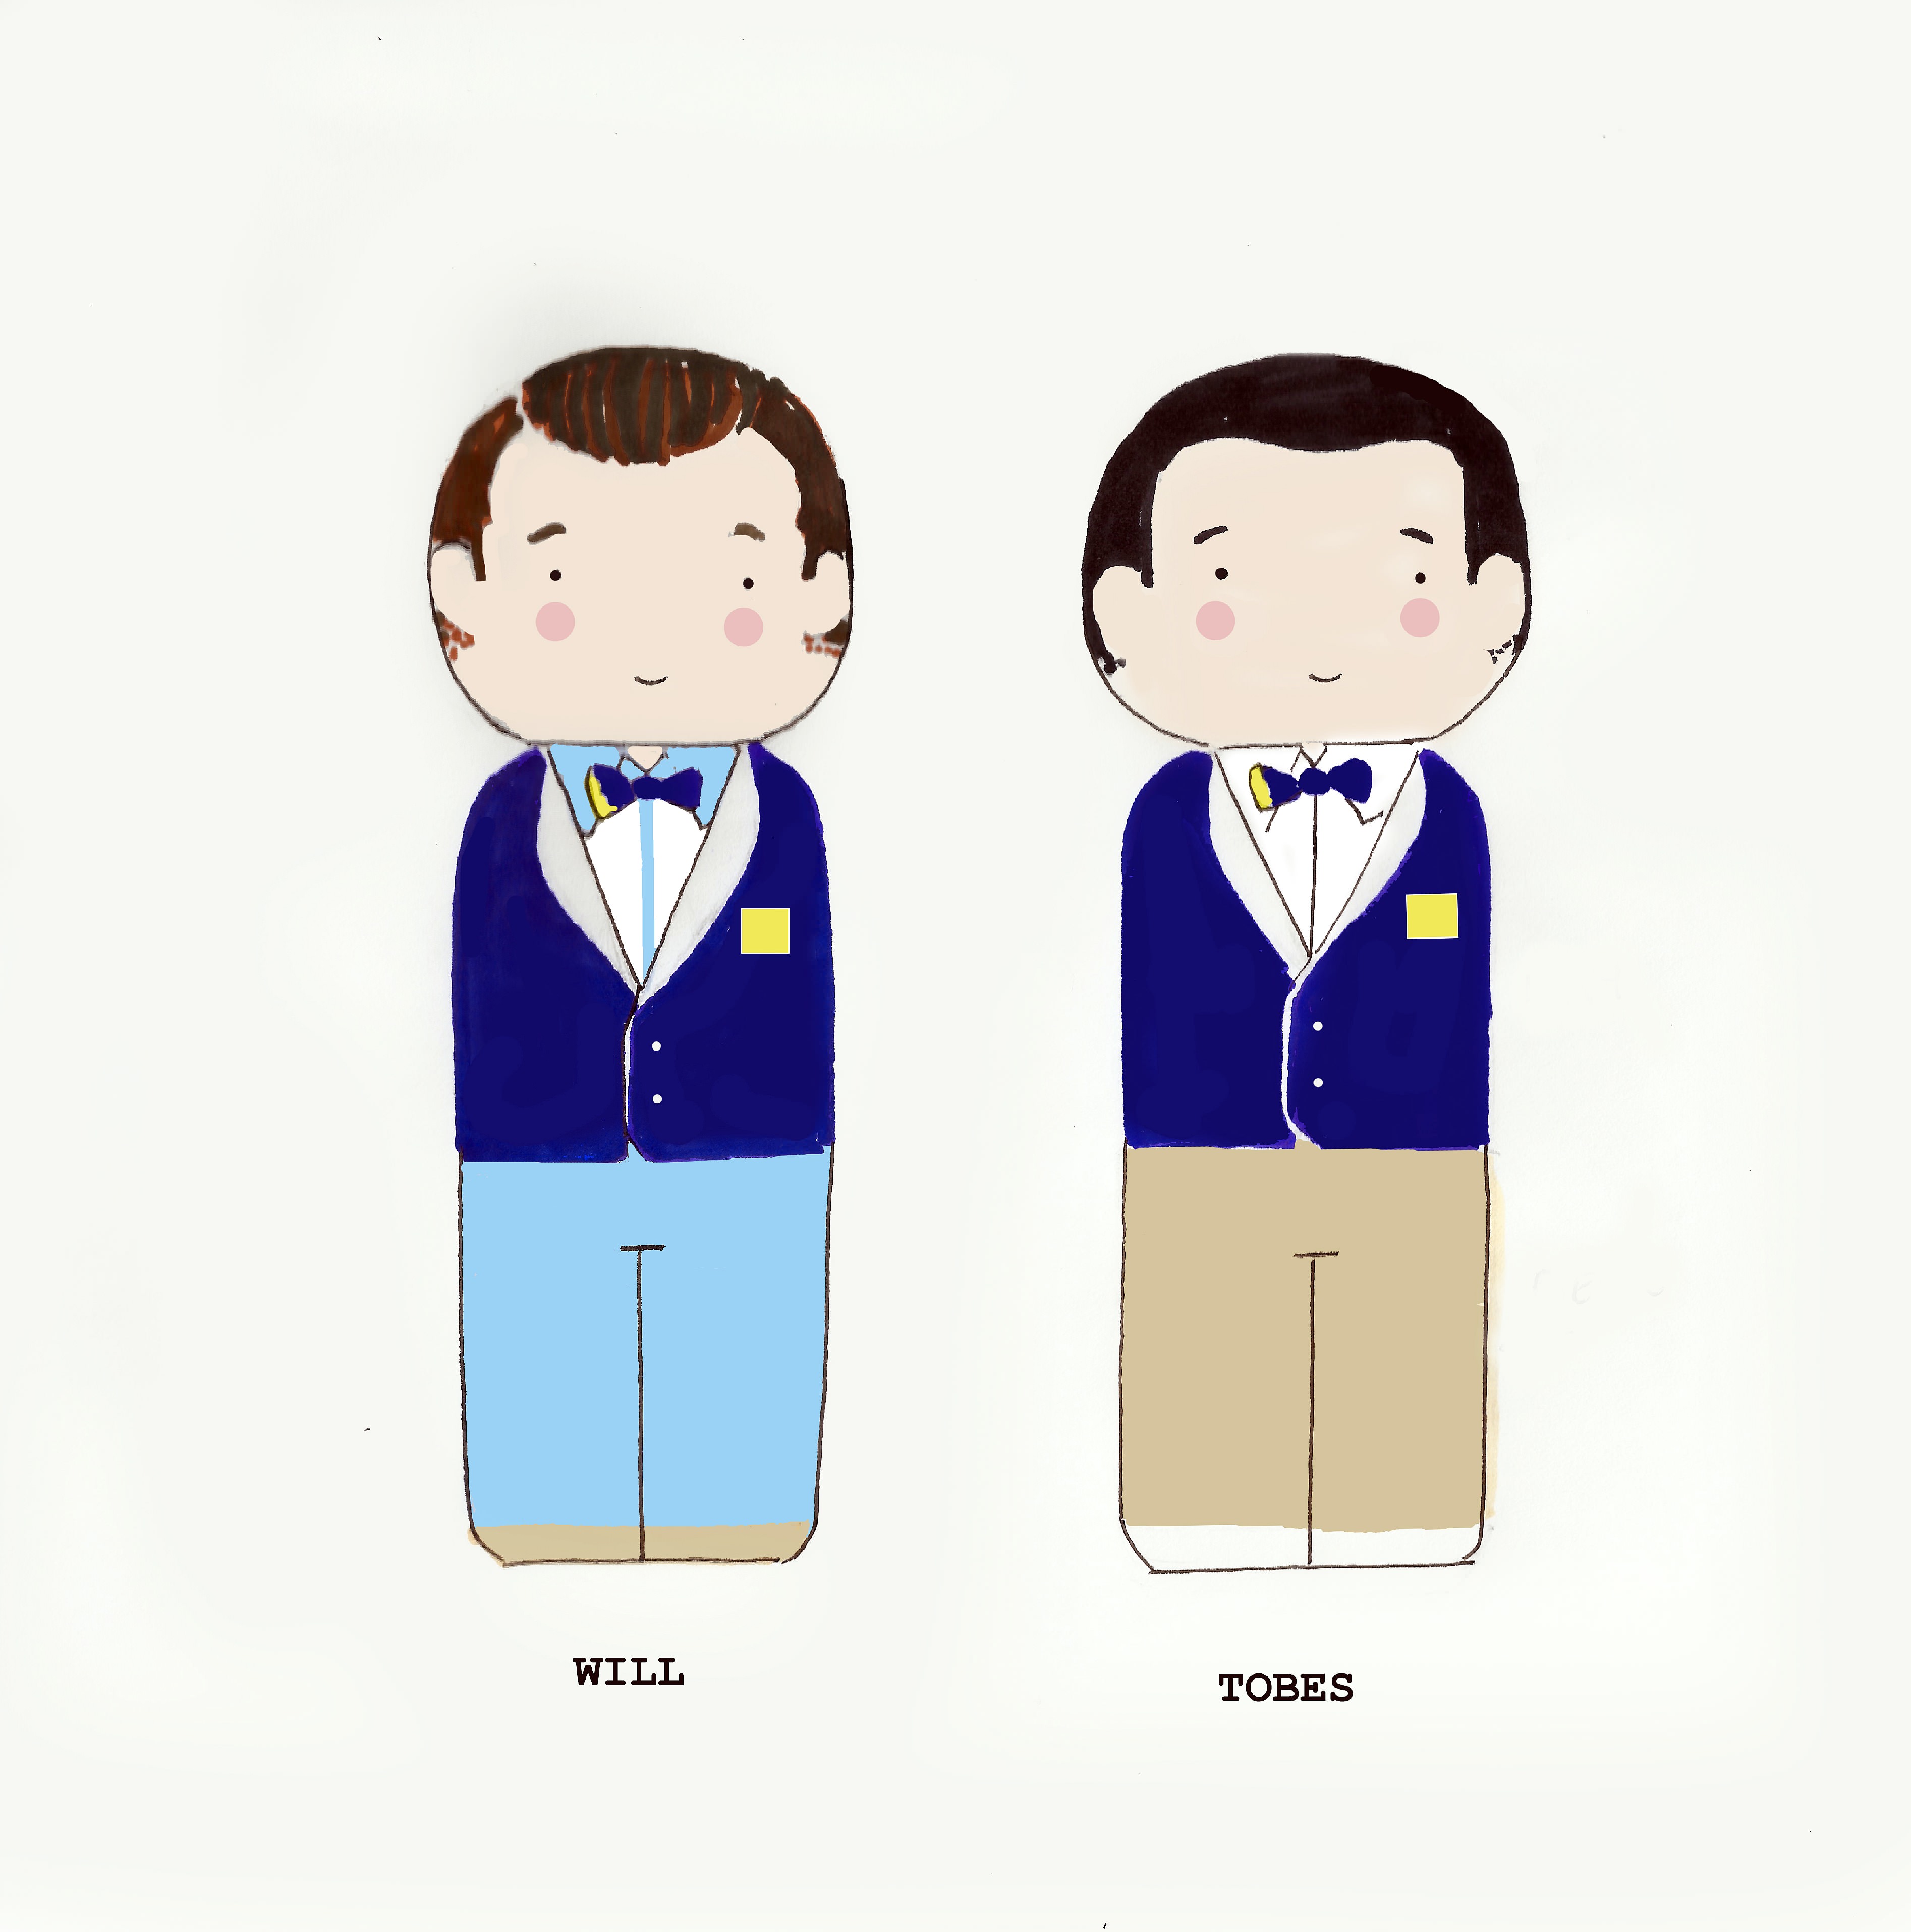 Will-and-Tobes-sketches-by-Sketchinc-on-littlebigbell.com.jpg